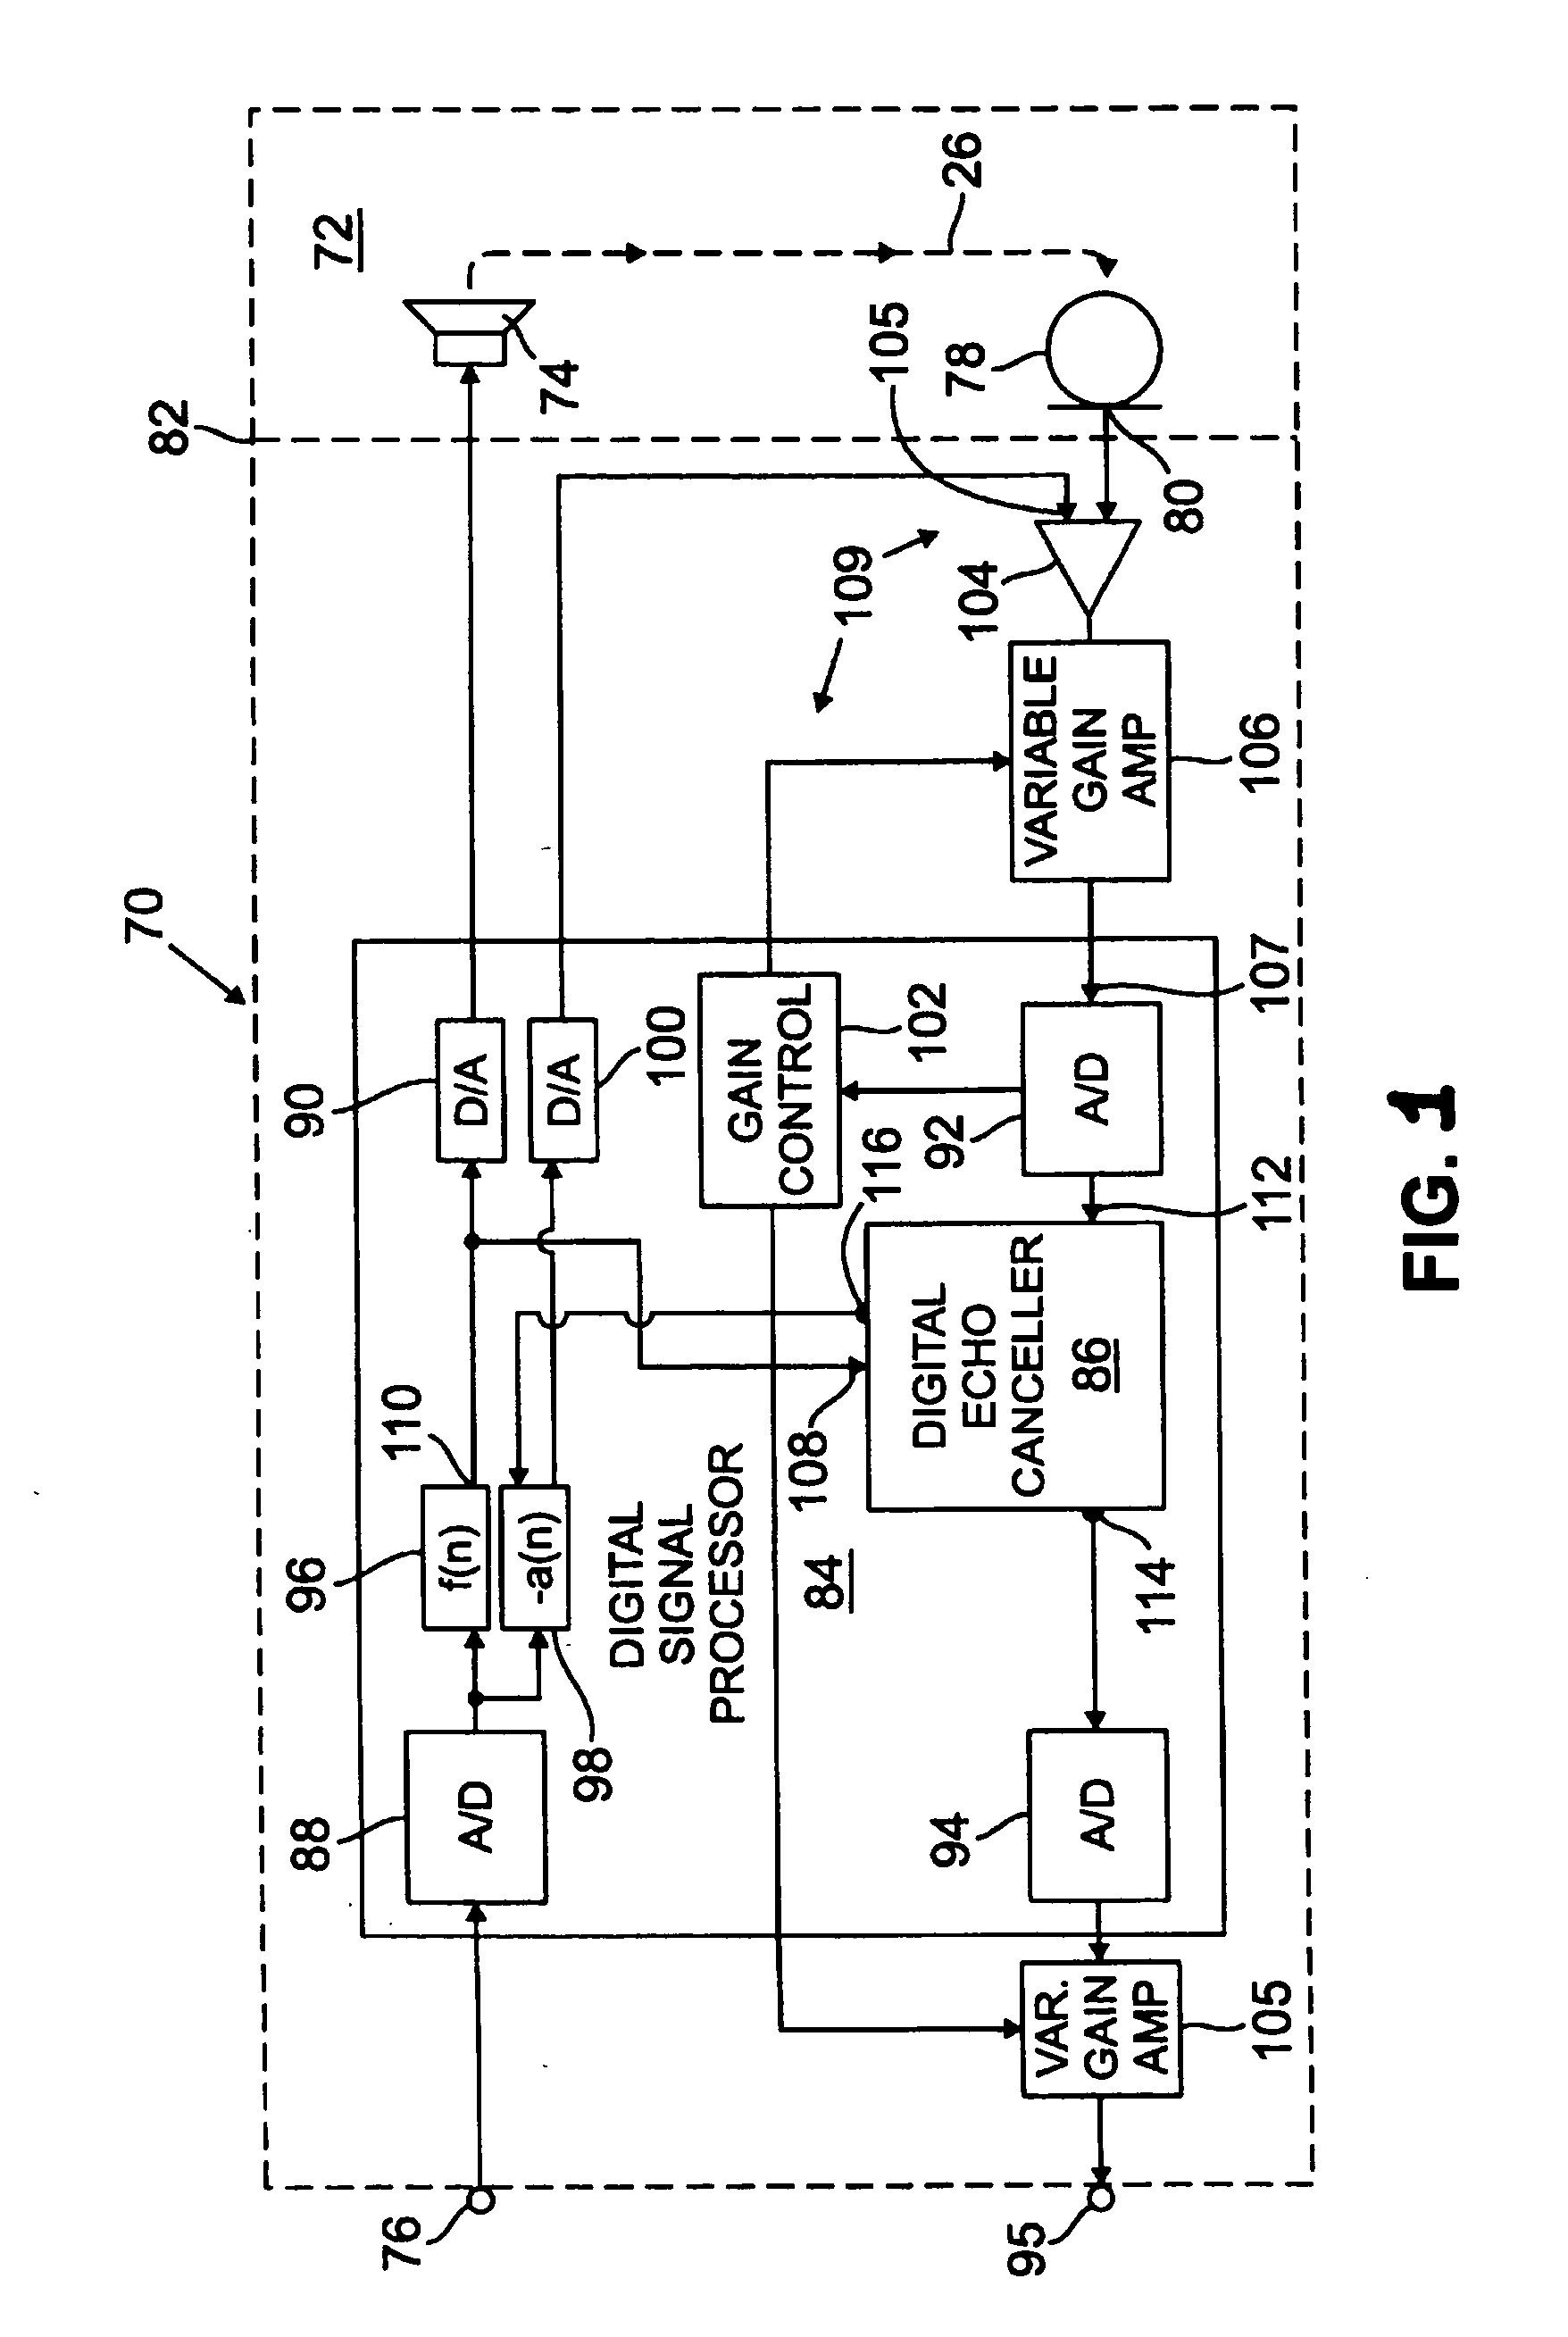 Reduction in acoustic coupling in communication systems and appliances using multiple microphones